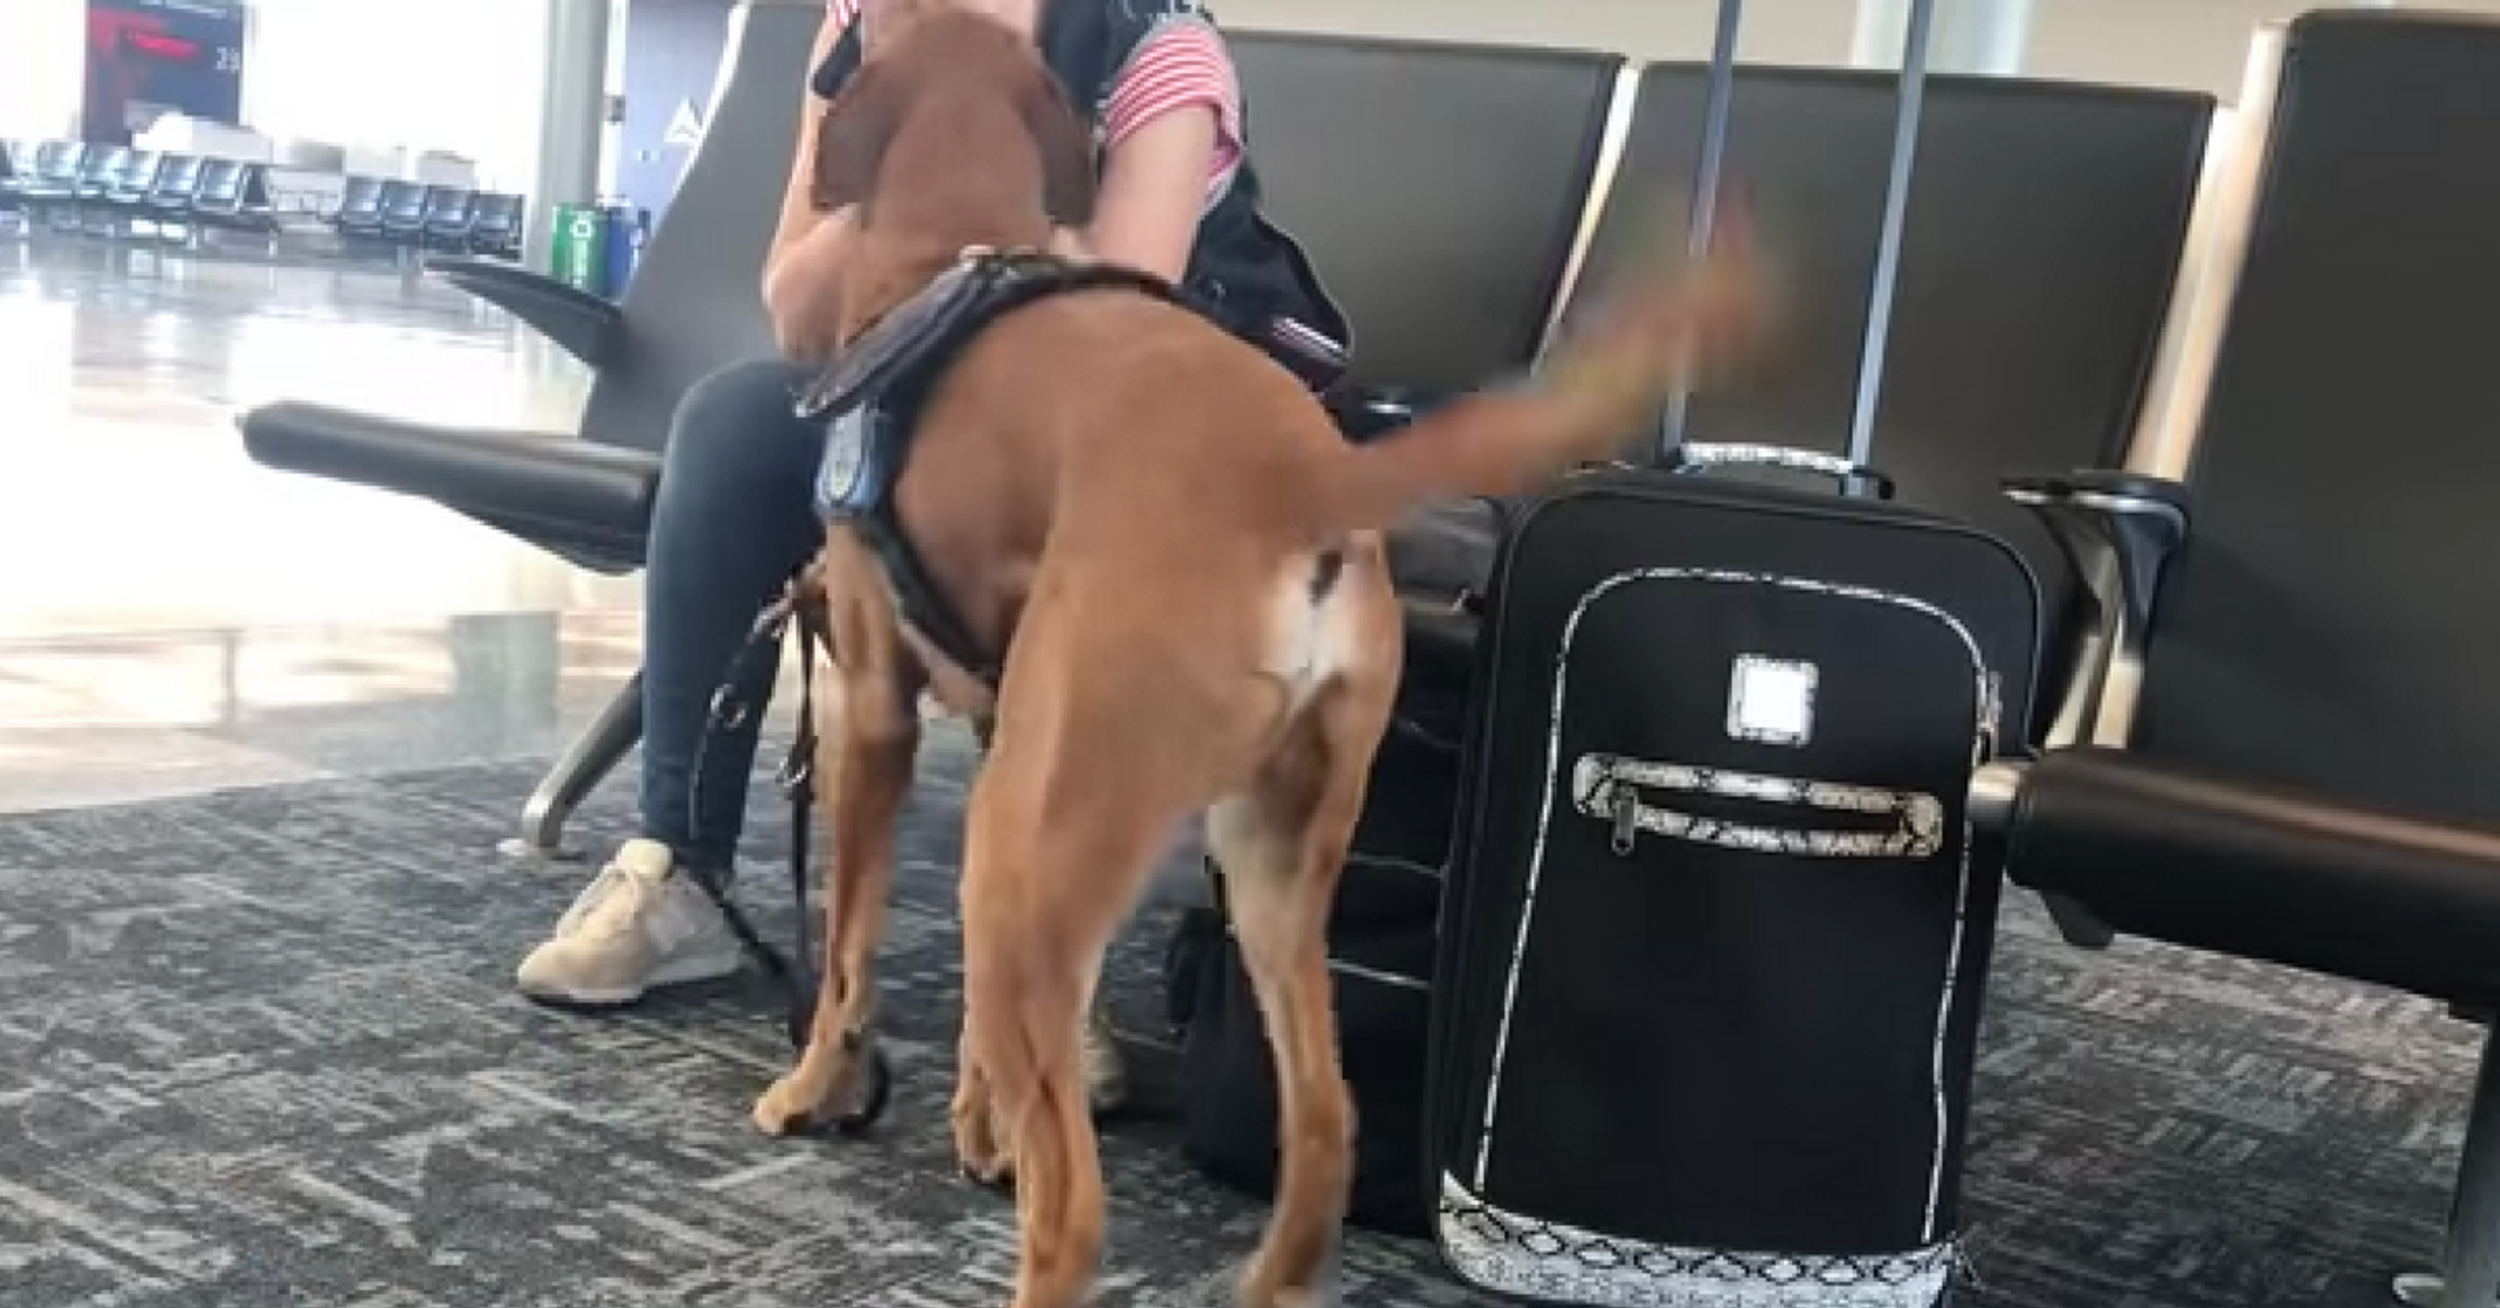 Watch As Service Dog Comes To Owner's Rescue During An Airport Panic Attack